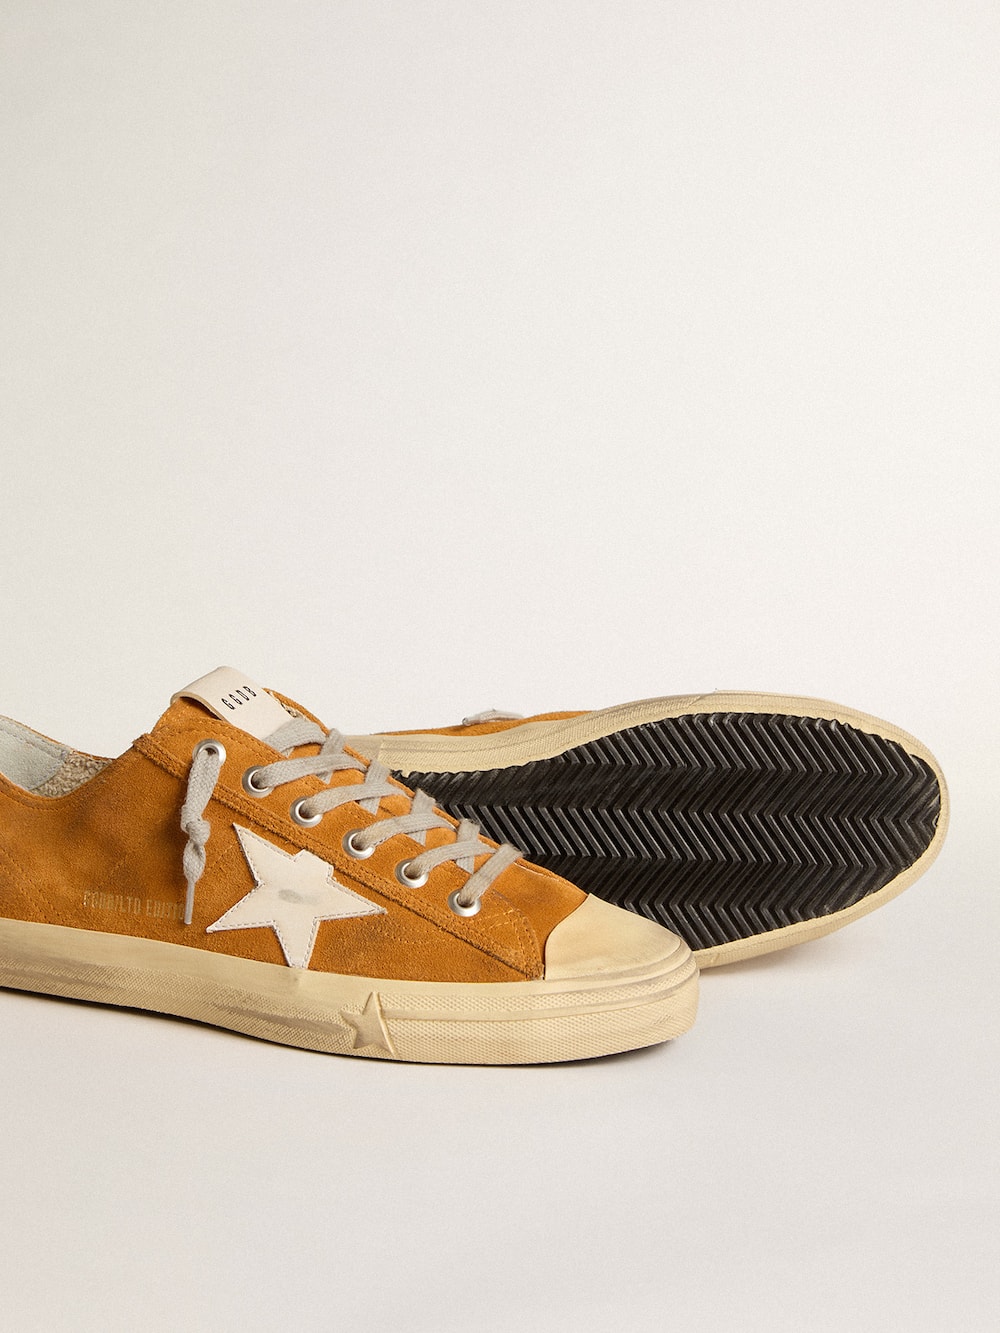 Golden Goose - Men's V-Star LTD in camel suede with a milk-white leather star in 